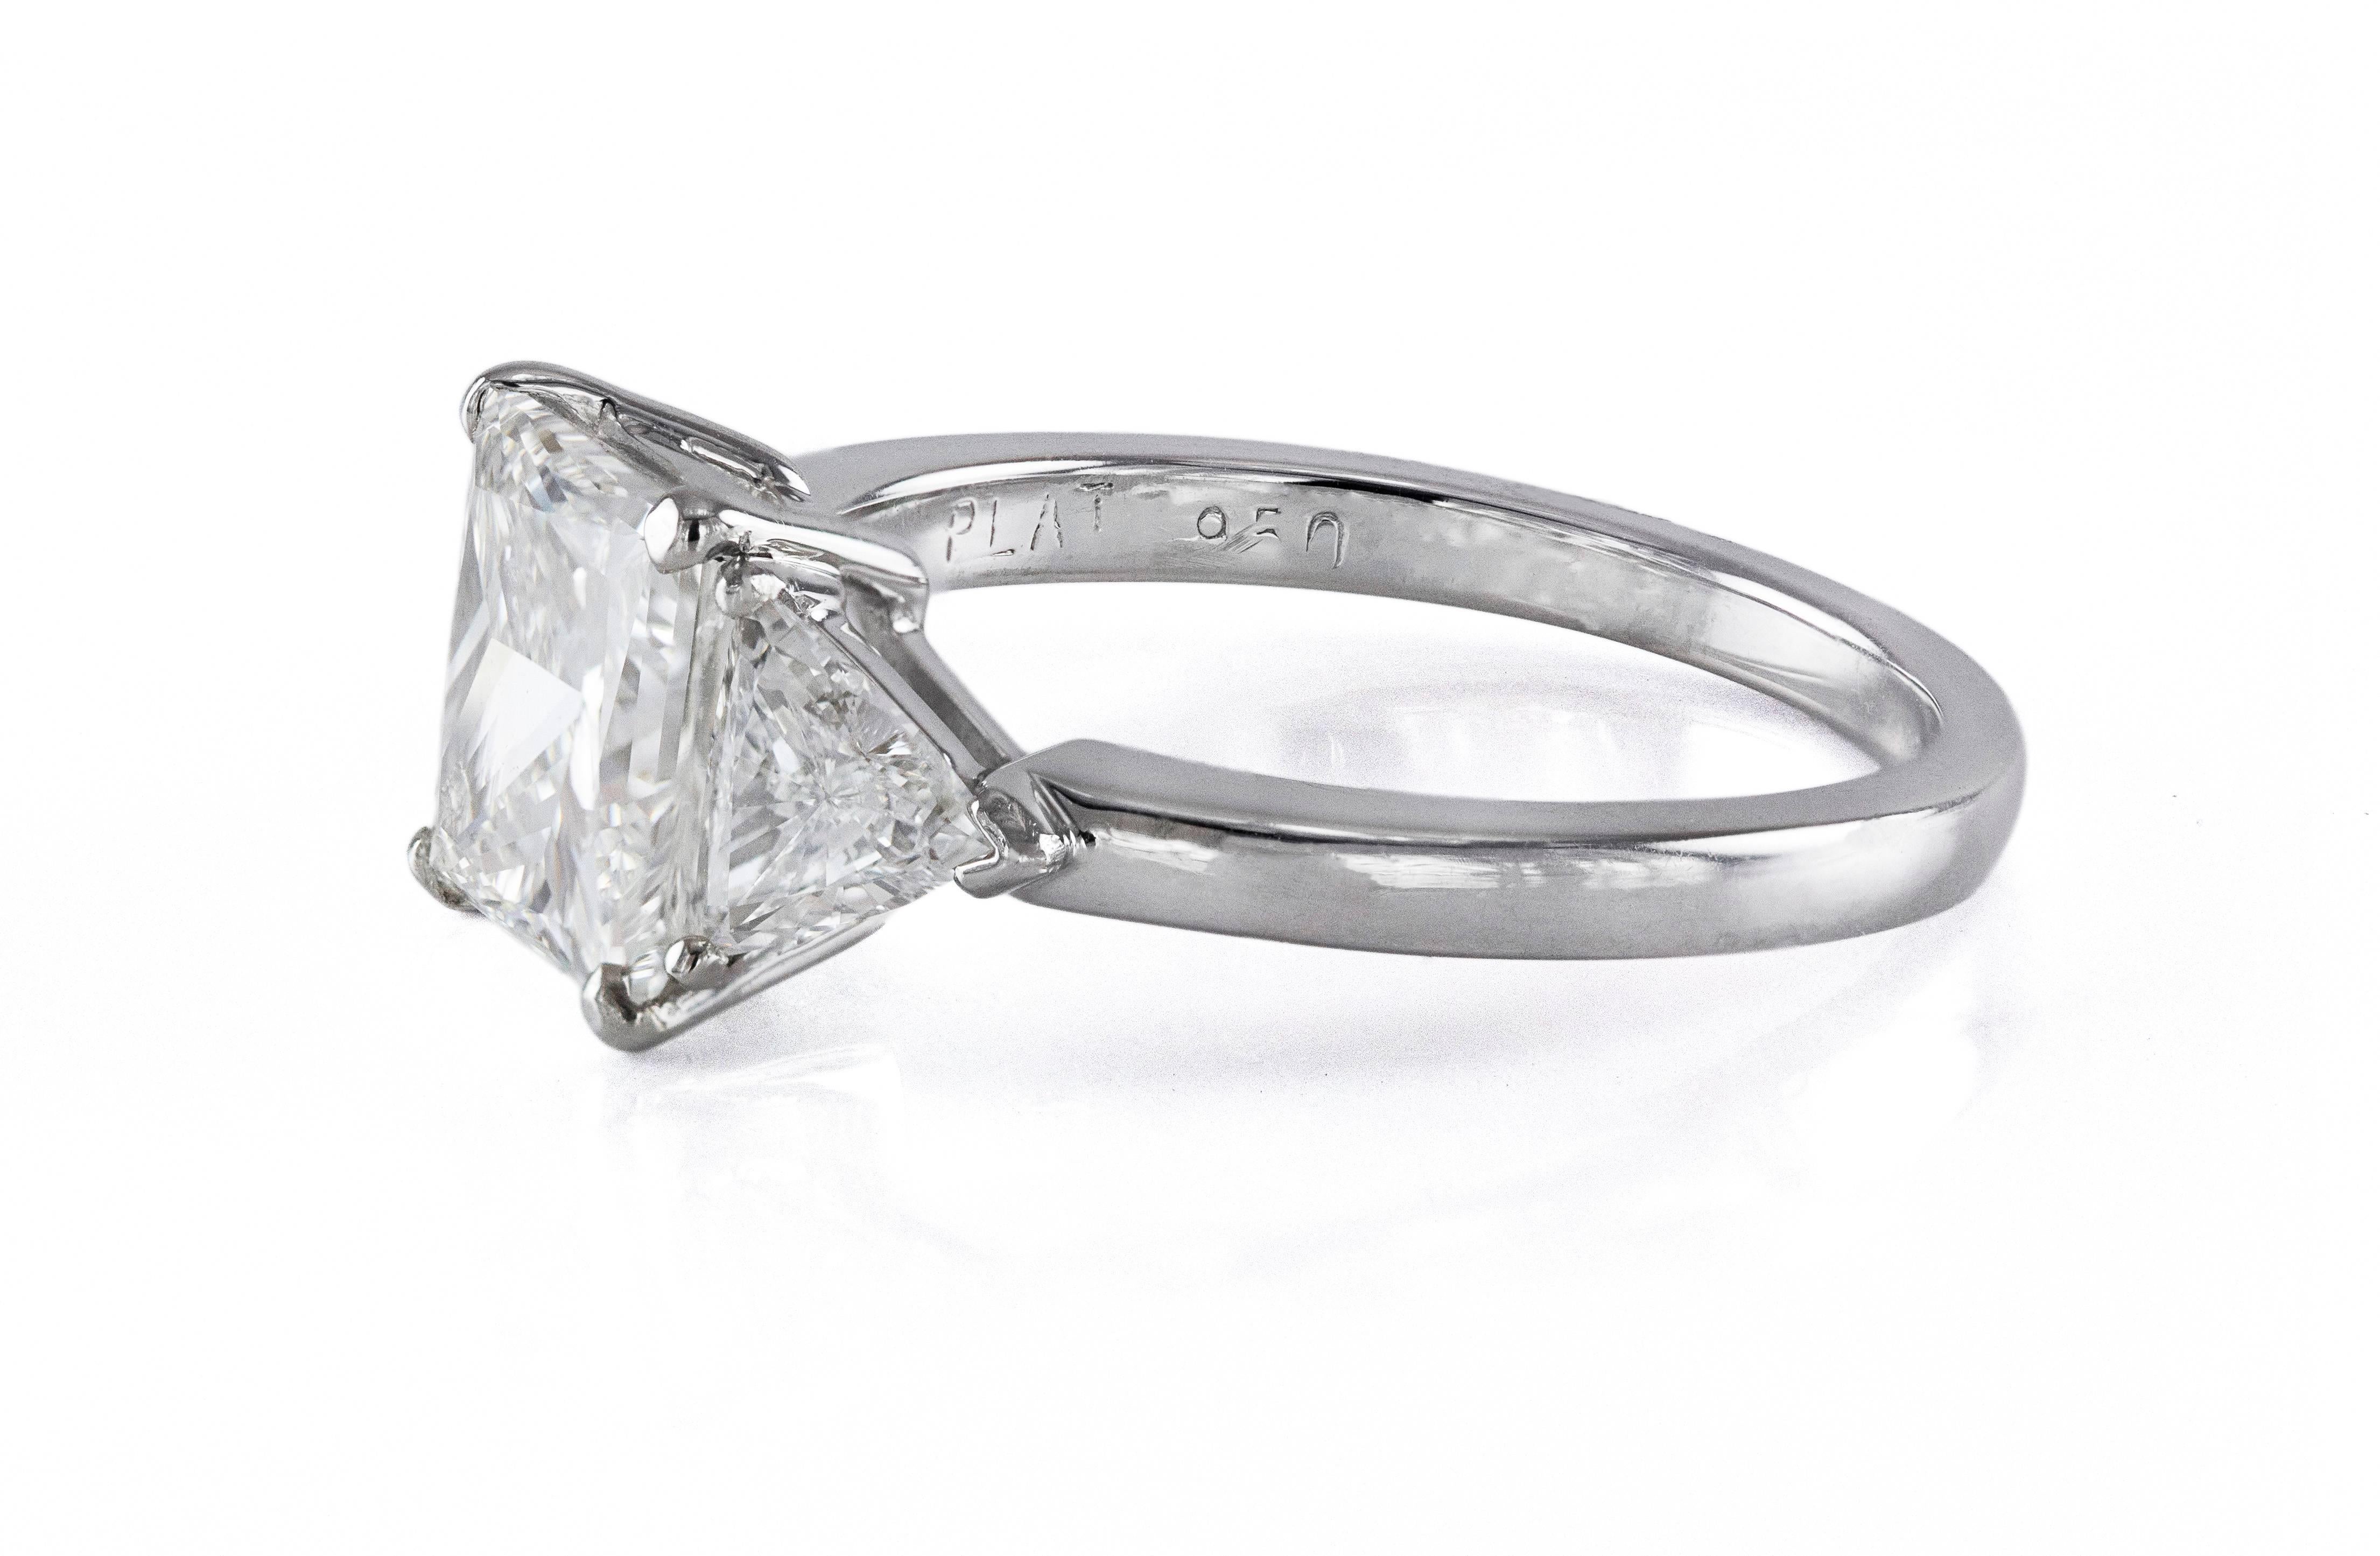 This engagement ring has a 2.51 carat Princess-cut diamond center stone accented by 2 trillion-cut diamond side stones weighing 0.65 carats total. Made in platinum. Size 7 (sizable).

Style available in different price ranges. Prices are based on